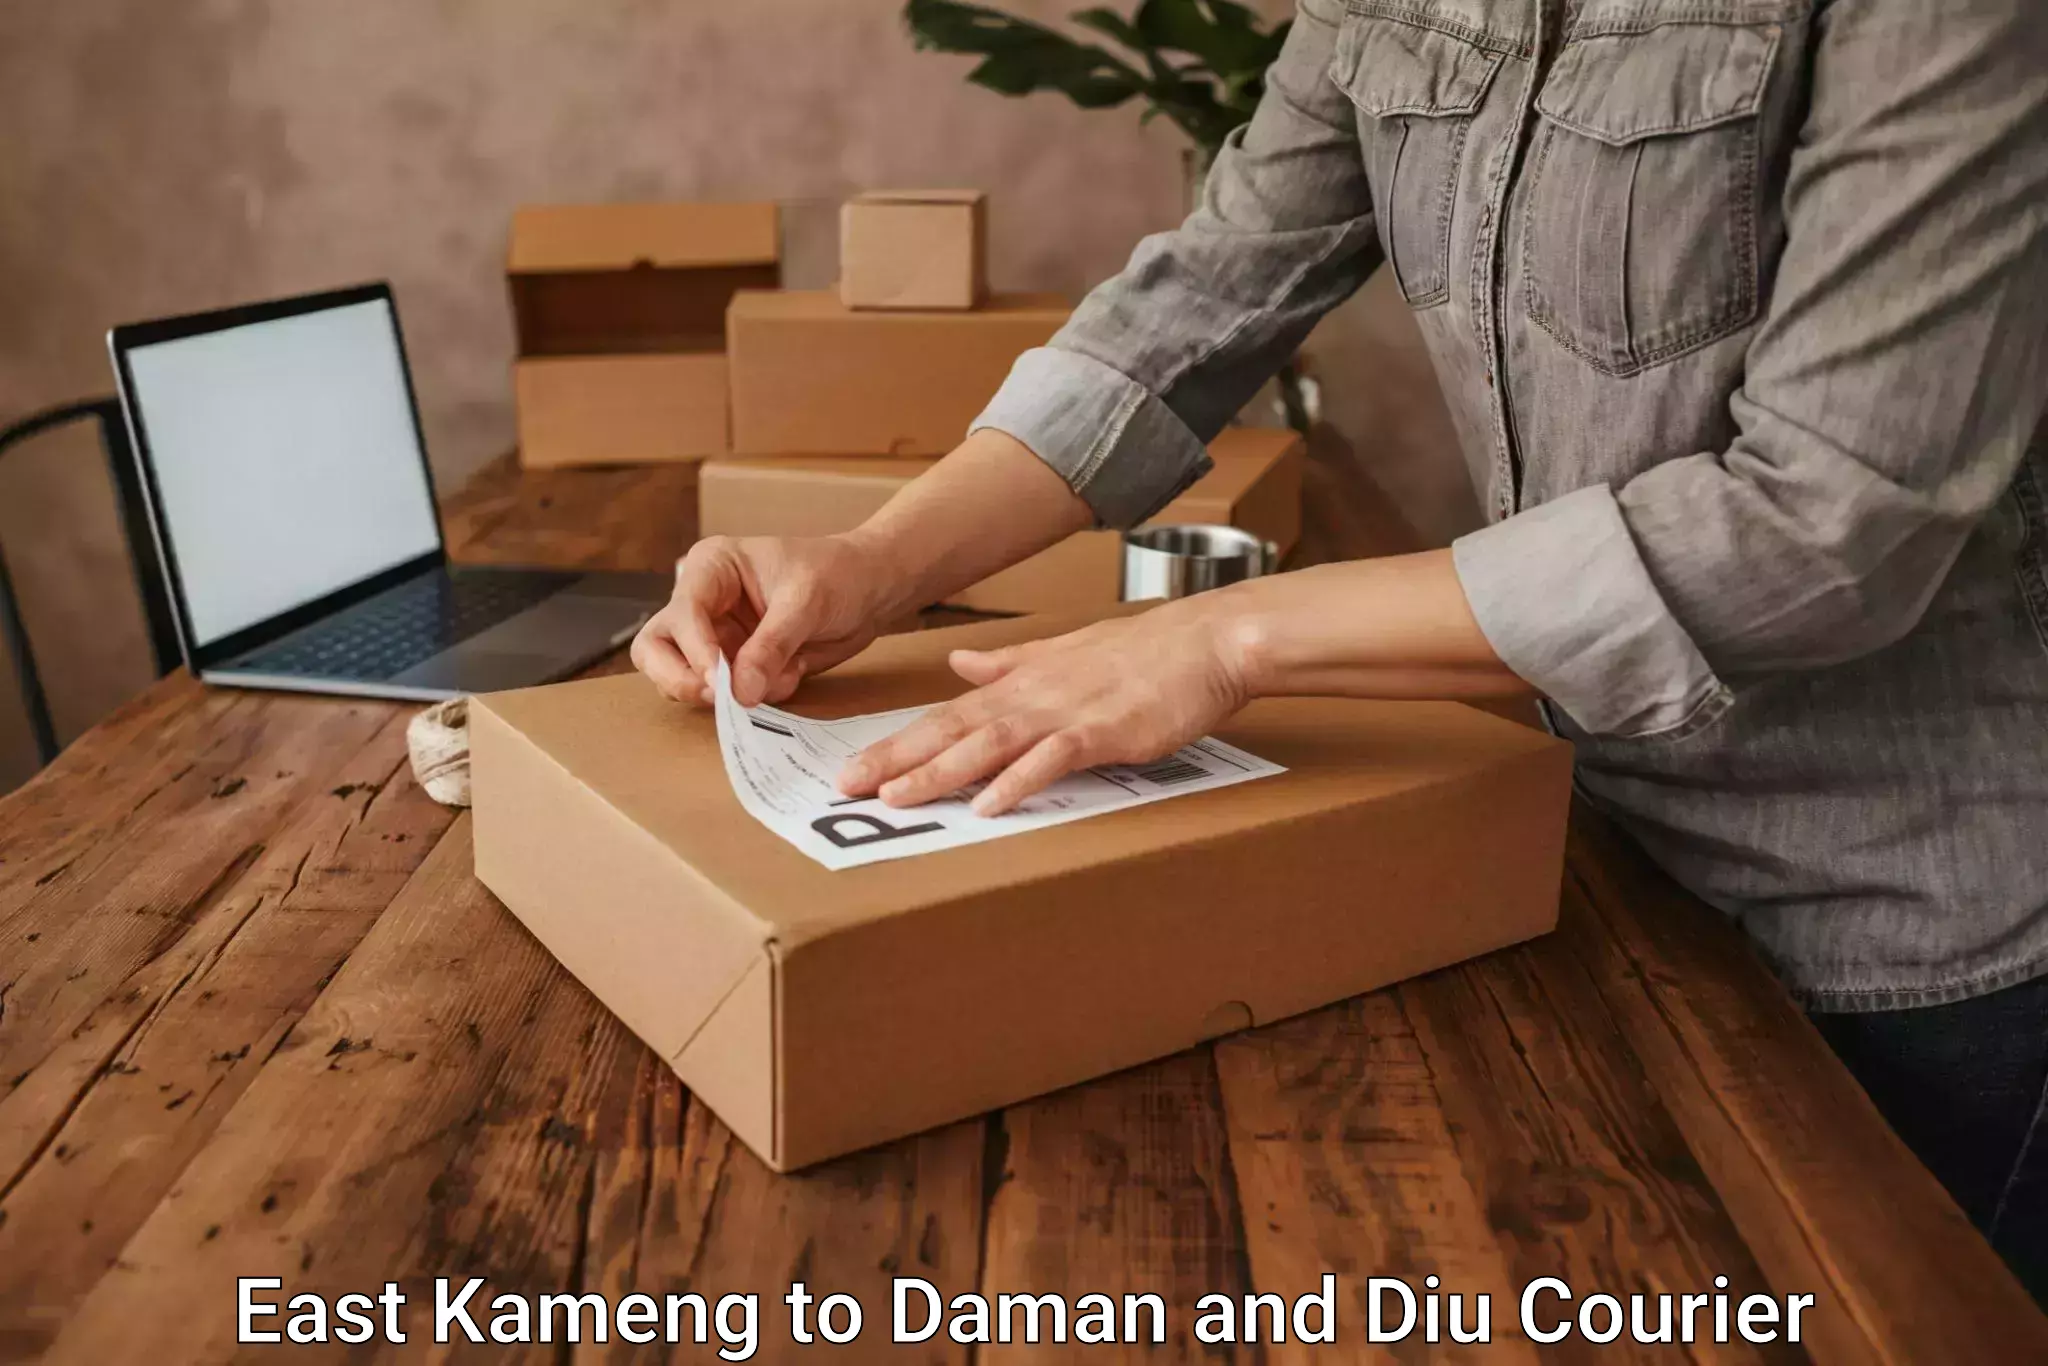 Doorstep delivery service East Kameng to Diu